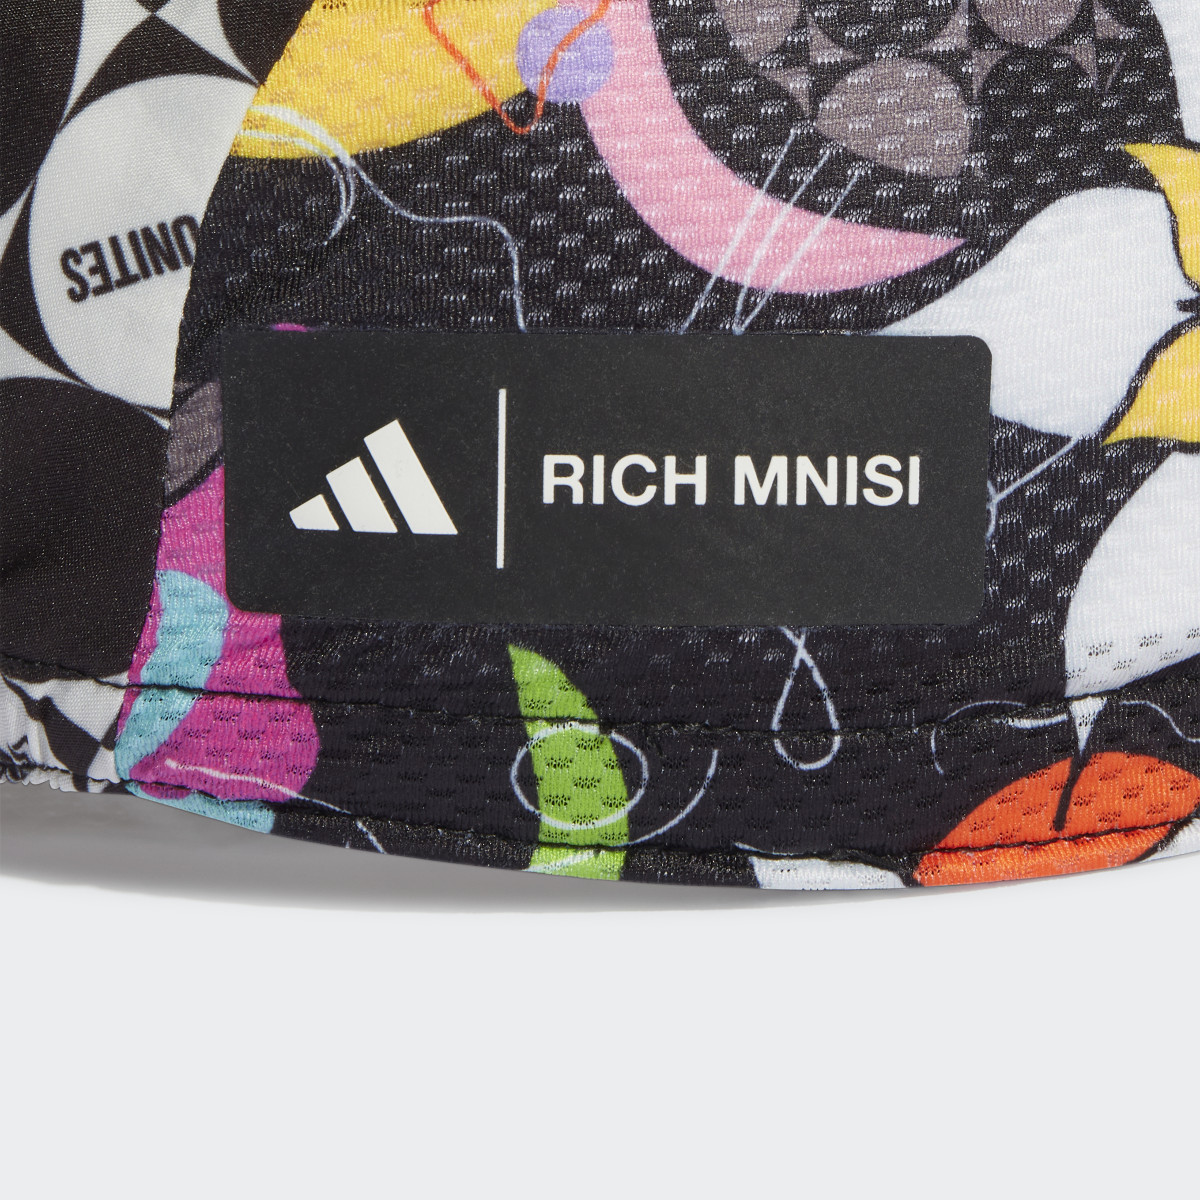 Adidas Rich Mnisi x The Cycling Cap. 4